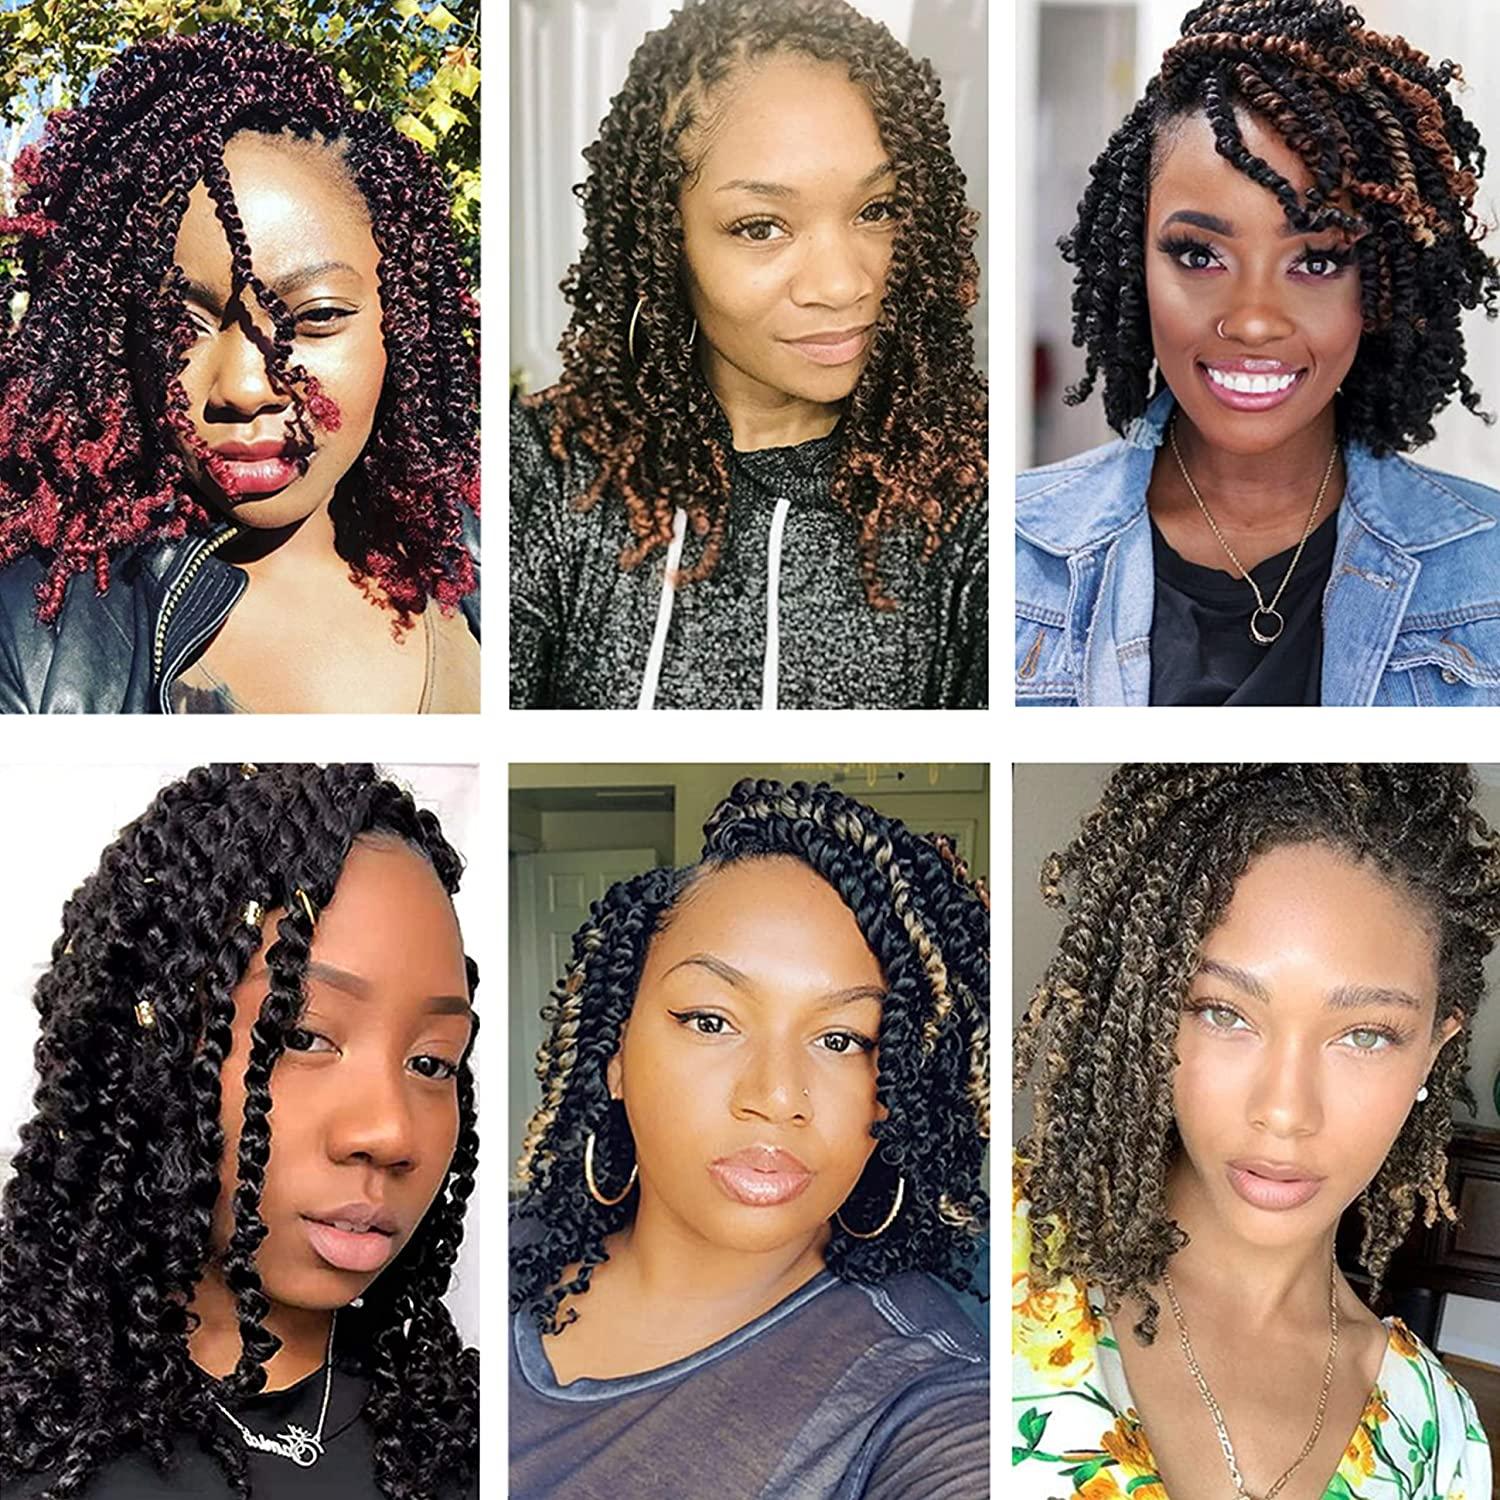 EASY & NEAT PASSION TWISTS (rubber band method) 